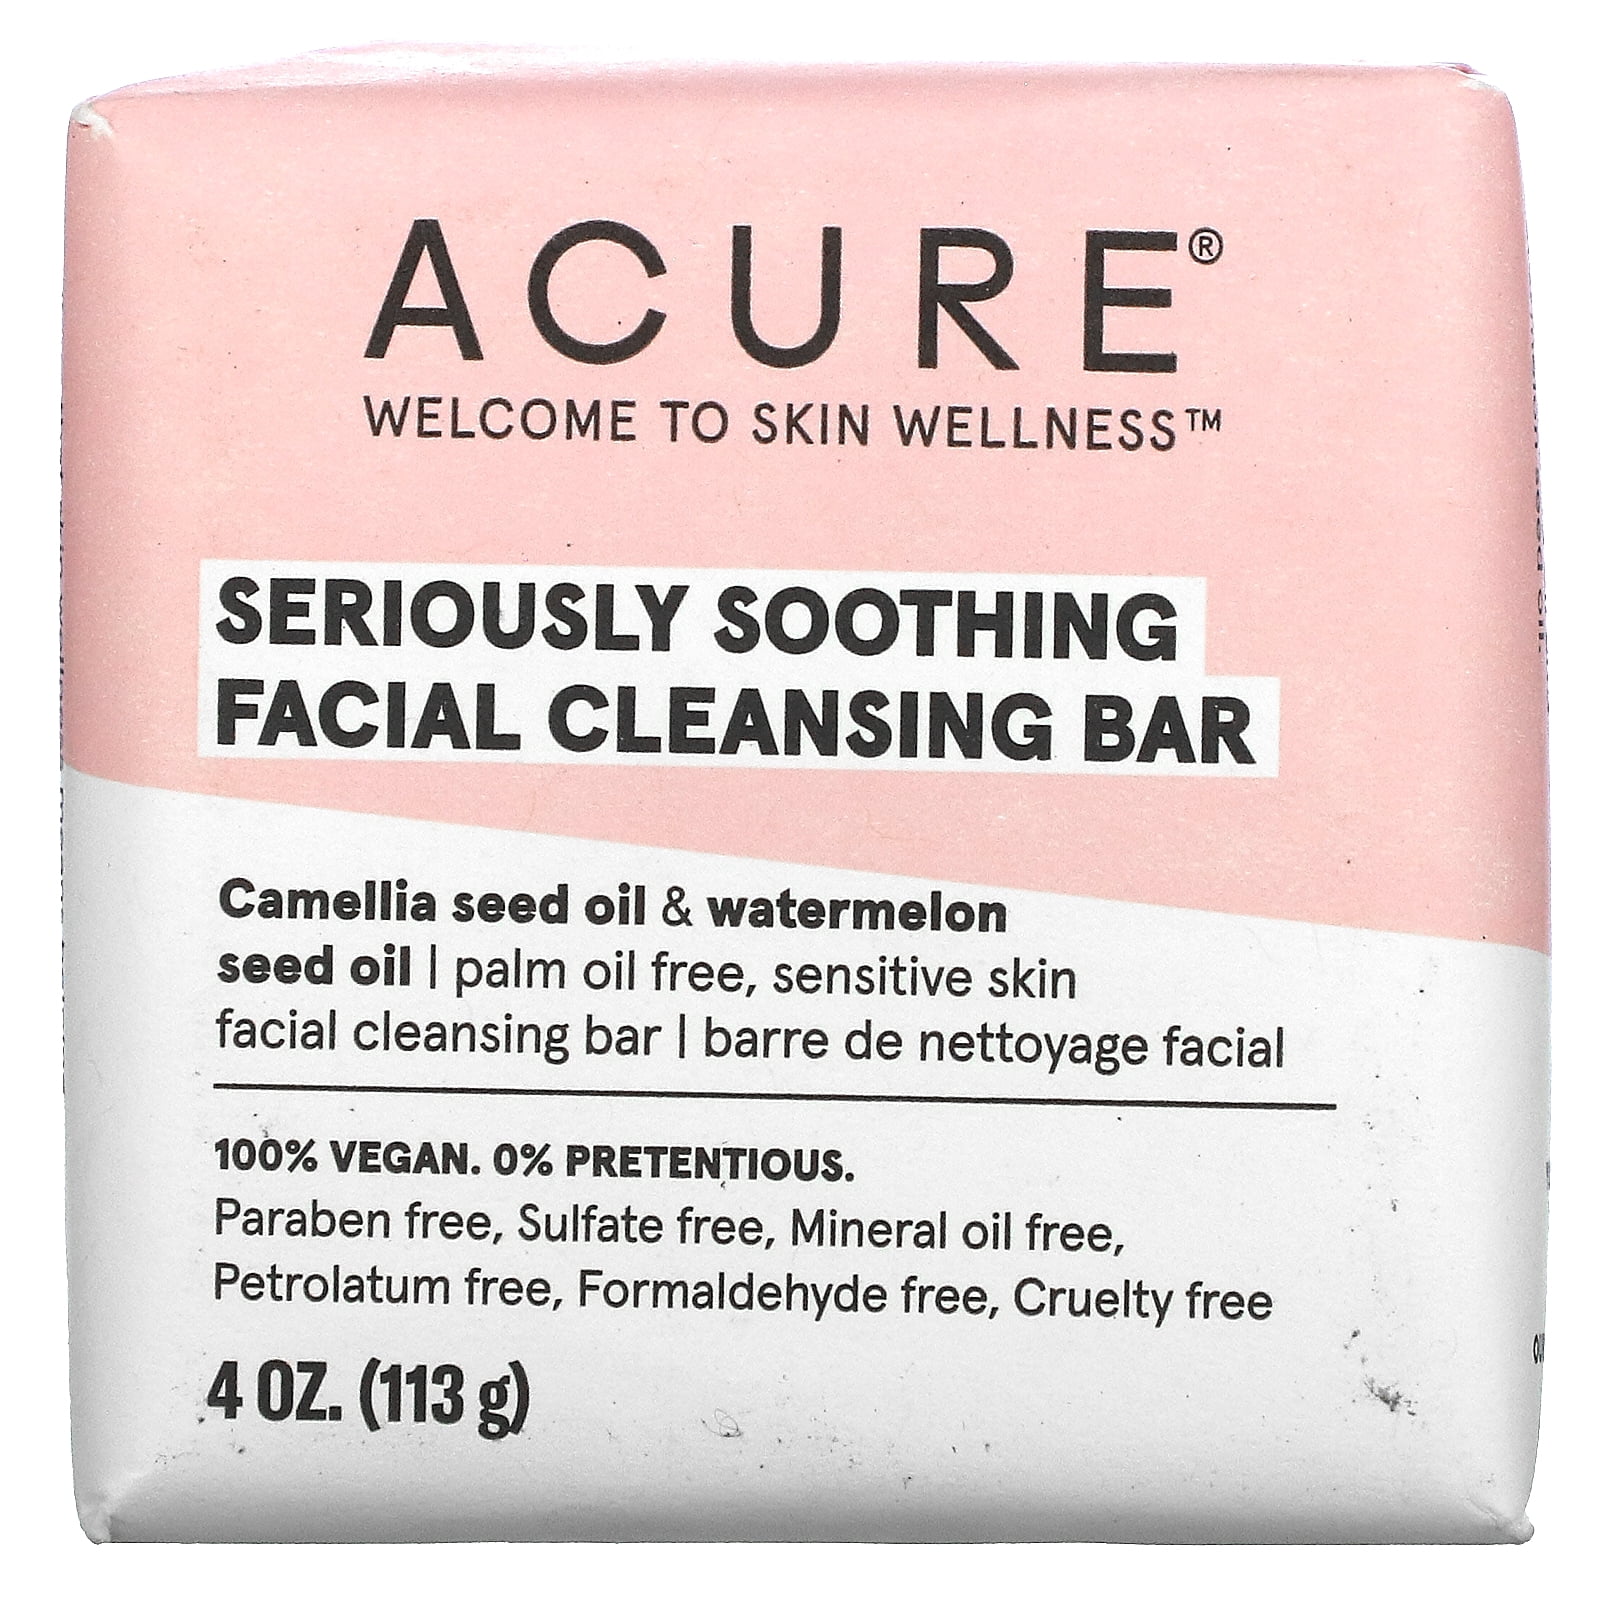 Picture of Acure 10509 4 oz Seriously Soothing Facial Cleansing Bar